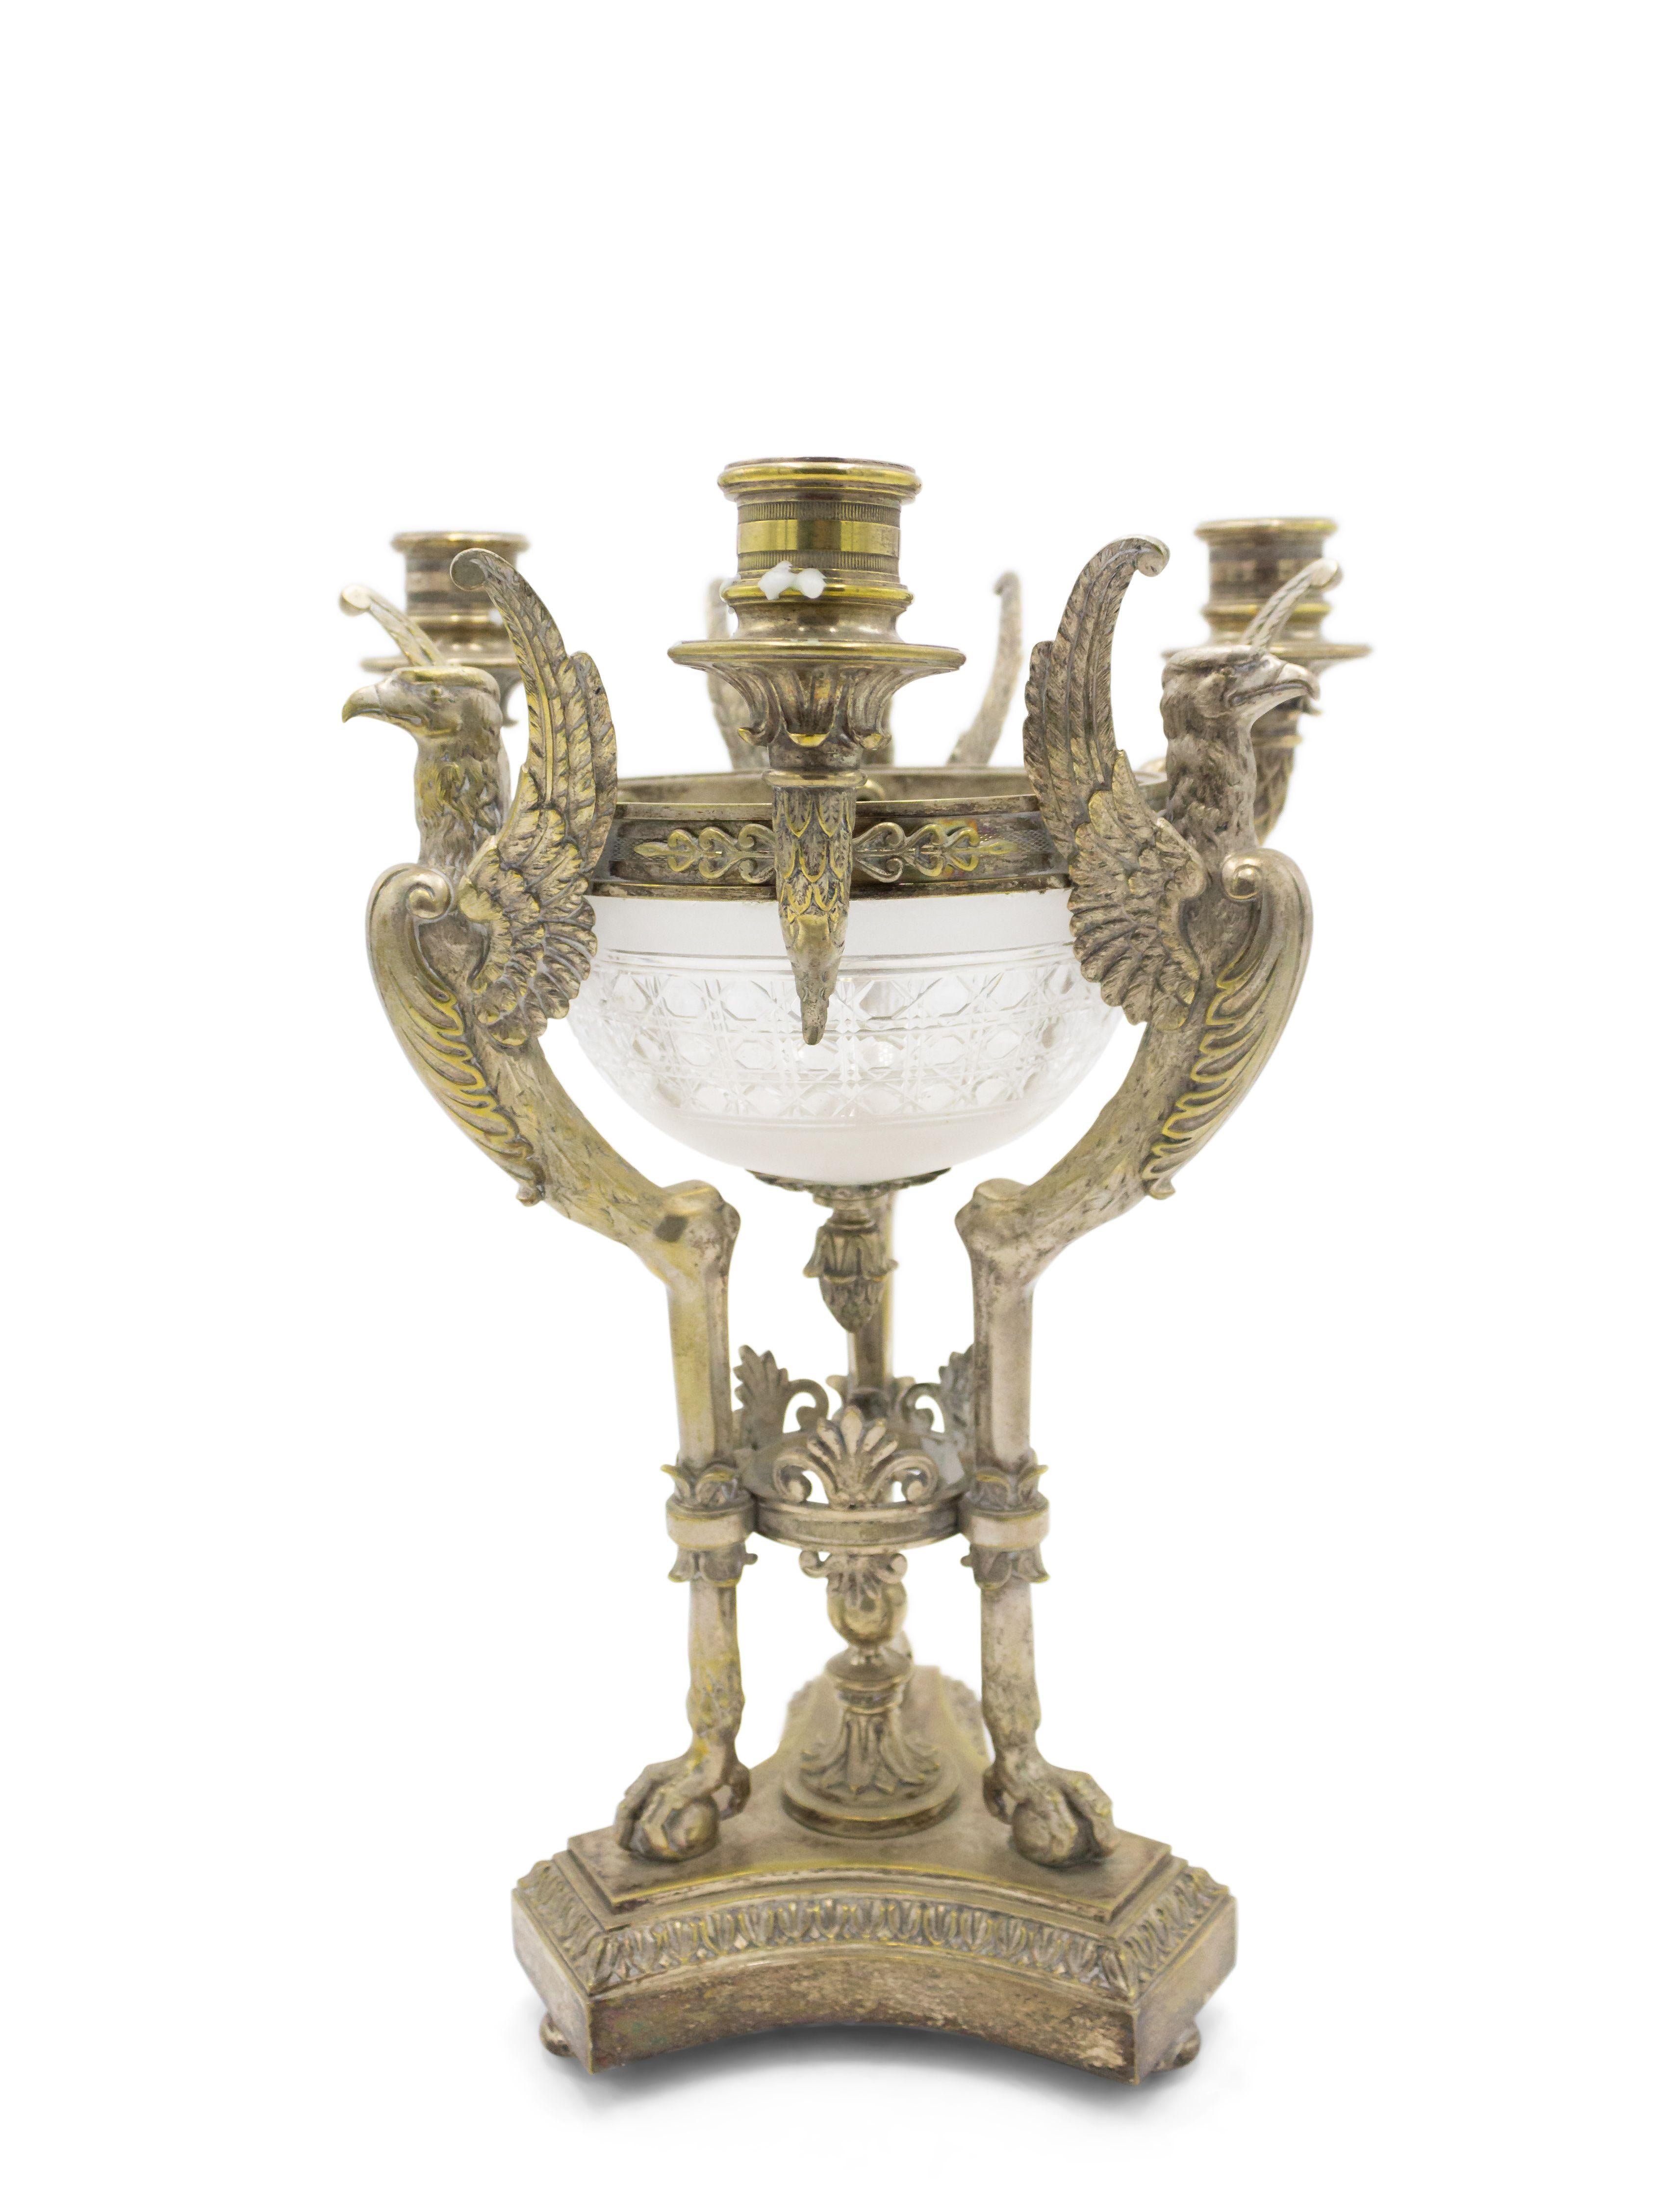 19th Century Neo-Classic Style Silver Plate Candelabra Centerpiece For Sale 1